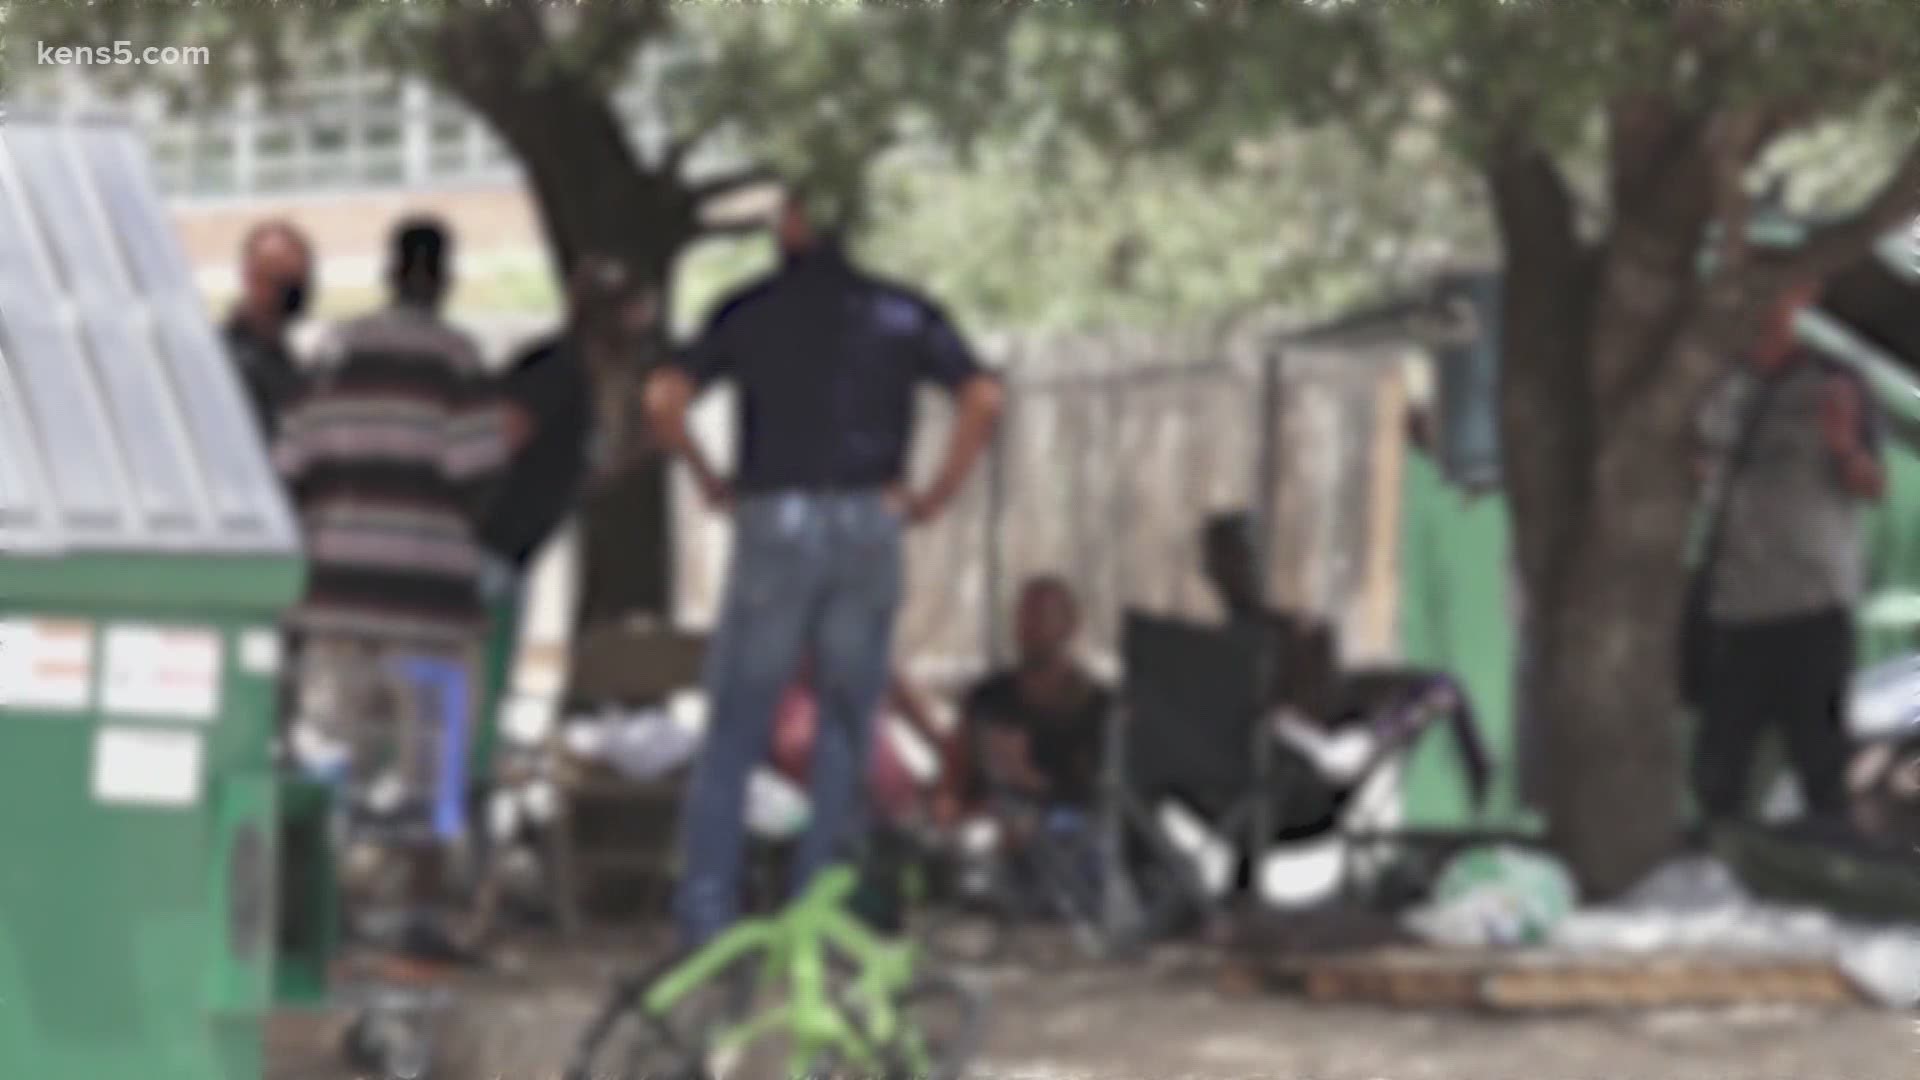 A program helping people living on the streets in one San Antonio neighborhood could soon go city-wide.